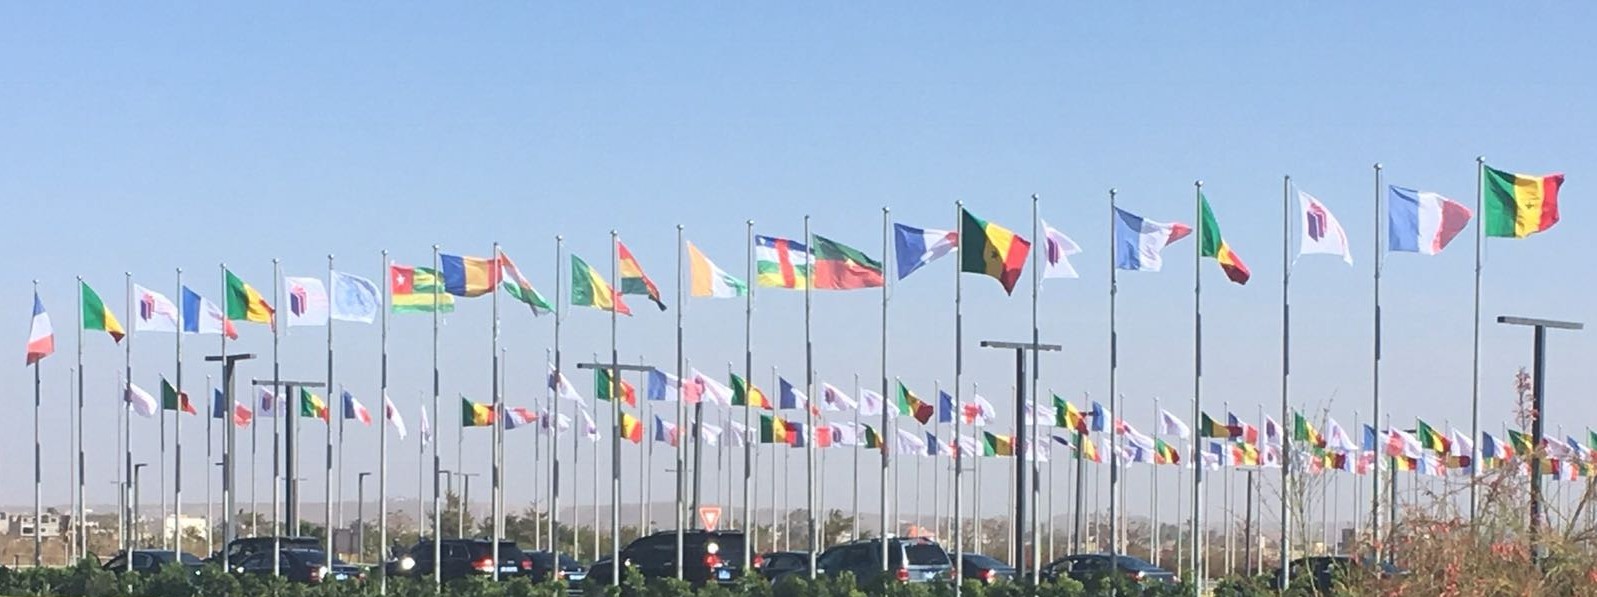 many flags